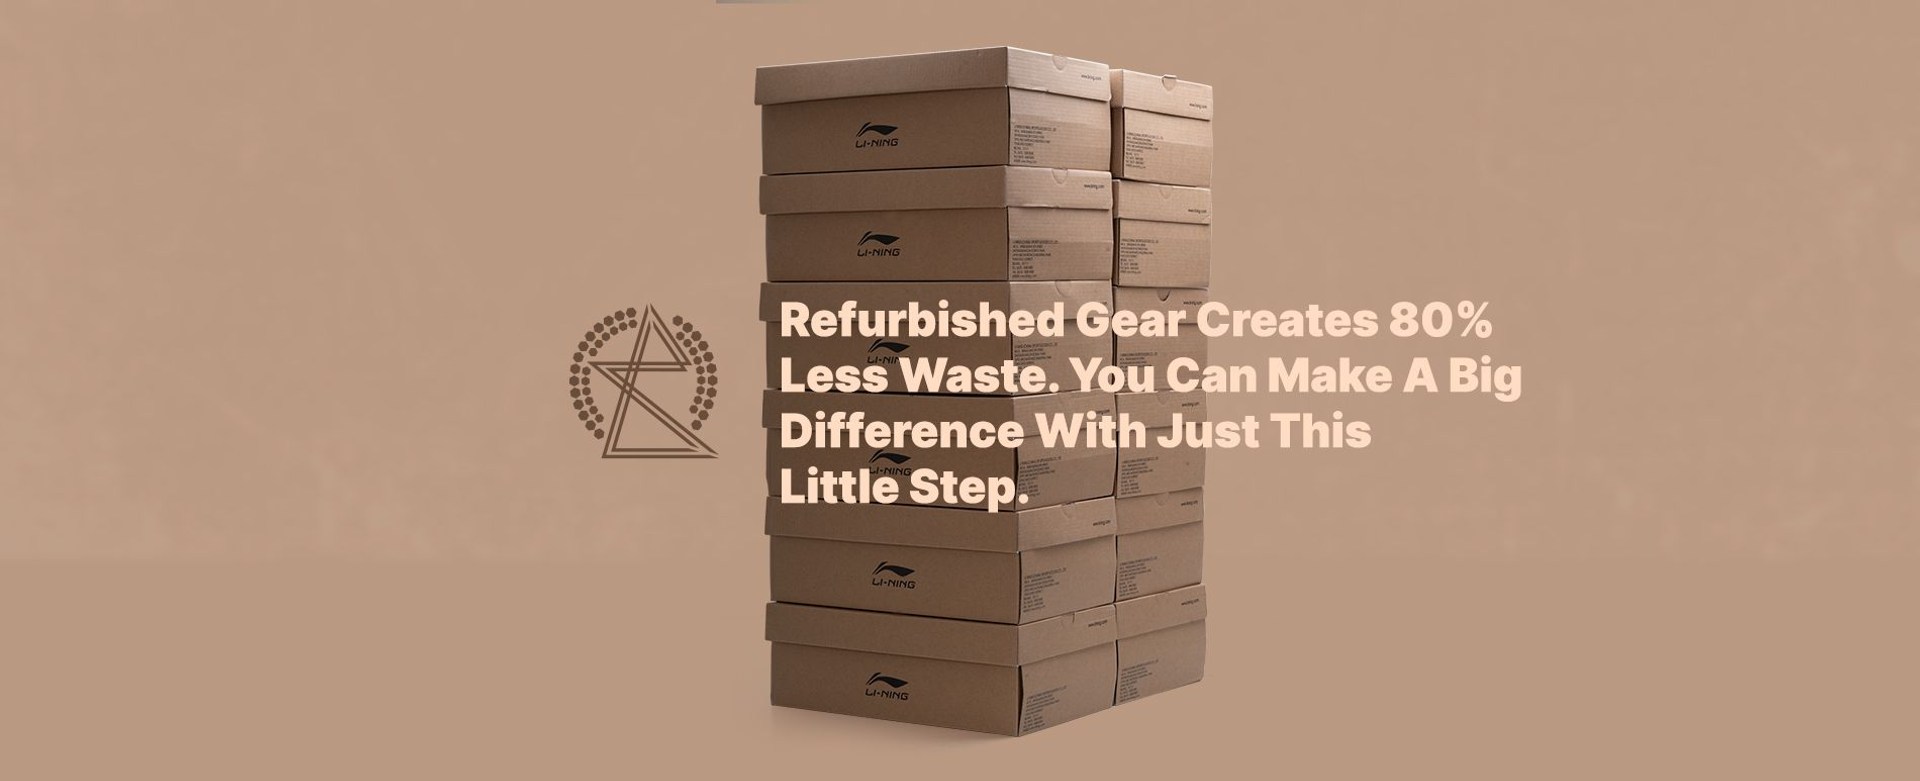 Refurbished Gear Creates 80% Less Waste. You Can Make A Big Difference With Just This Little Step.